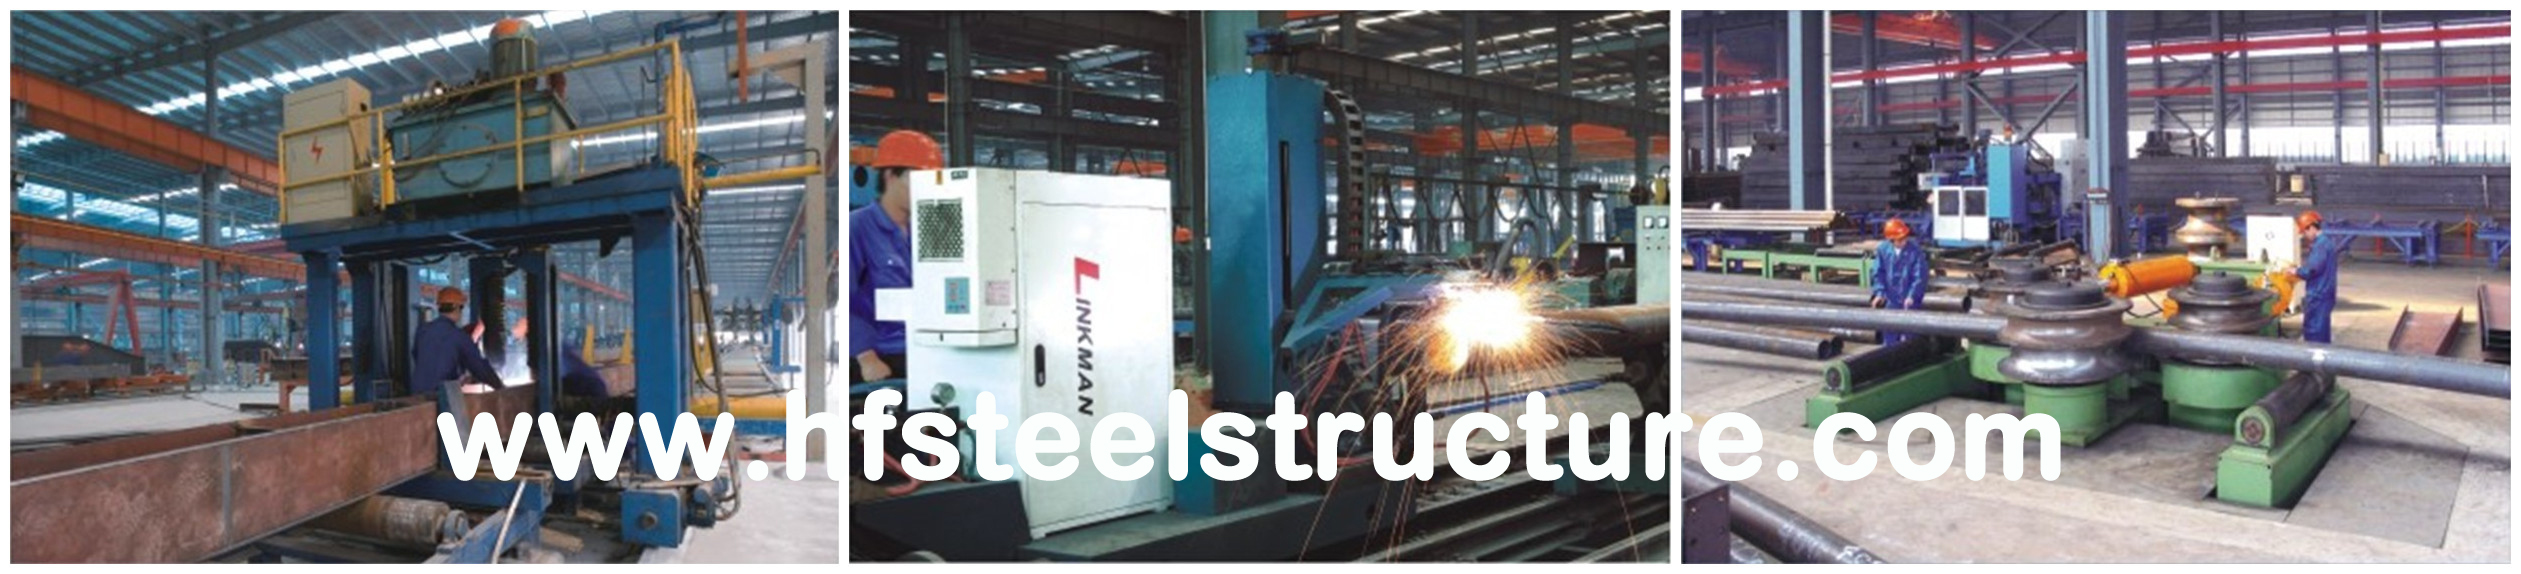 Braking, Rolling Metal Structural Steel Fabrications For Chassis, Transport Equipment